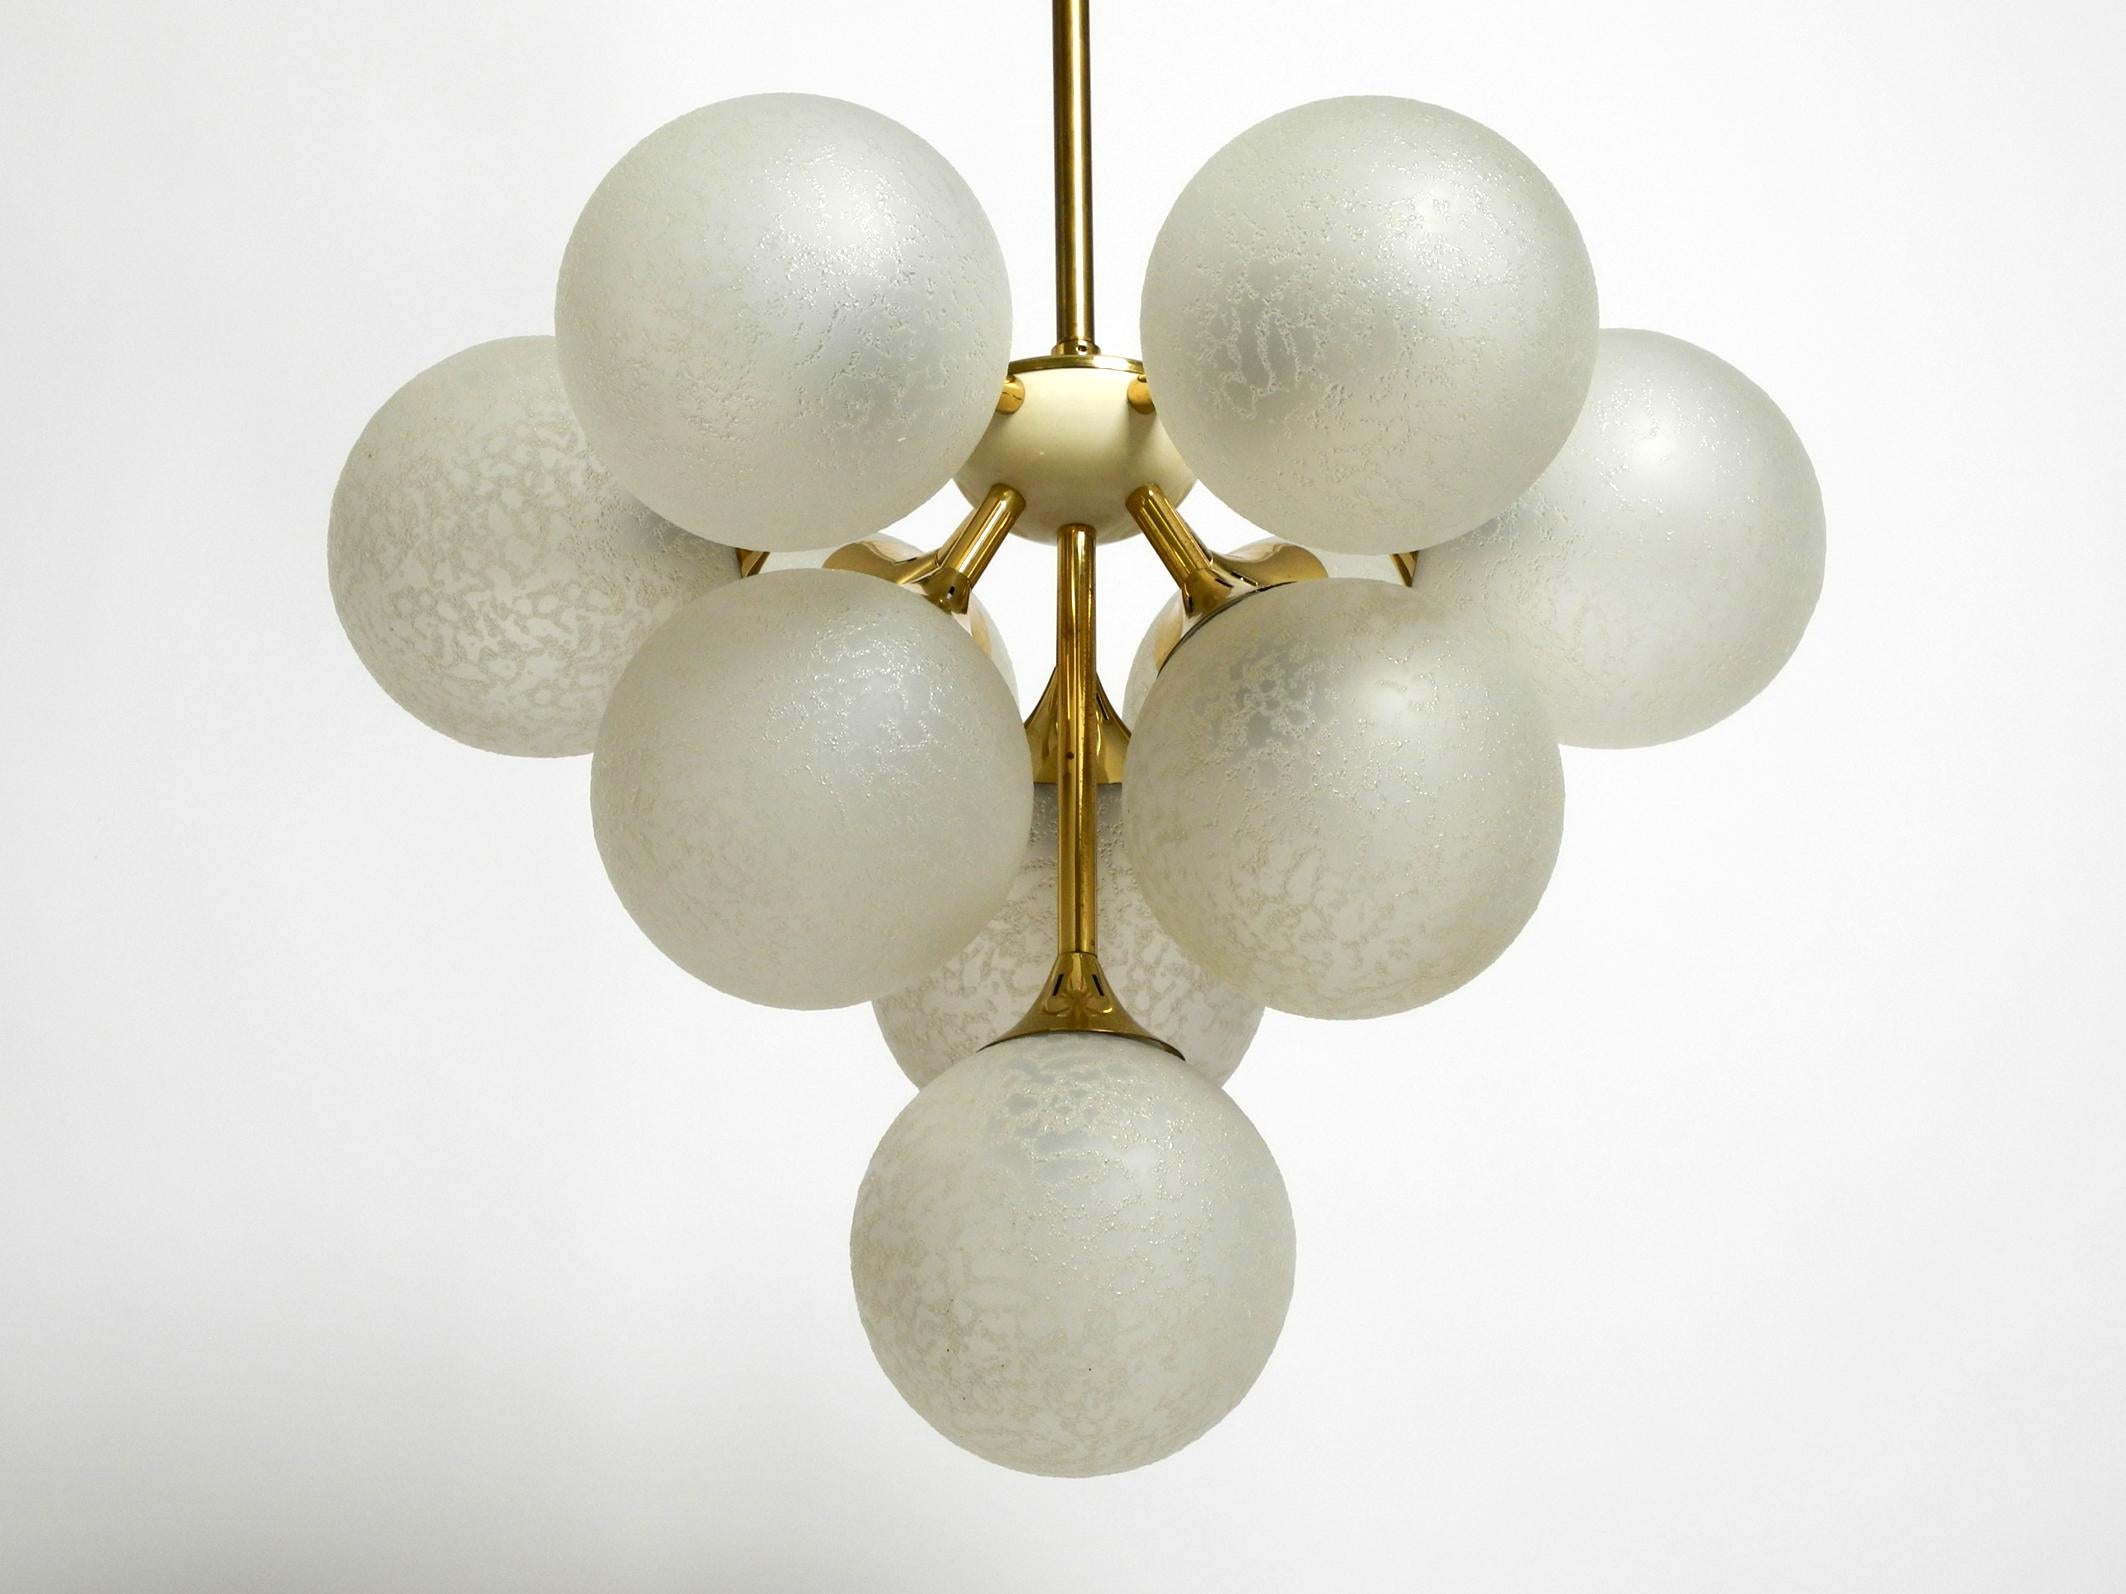 Beautiful rare Kaiser ceiling lamp with 10 glass spheres.
Gorgeous sixties Space Age design for great and glare-free light.
The glasses are white silver matted with a fine structure.
The frame is partly made of brass and metal anodized in gold